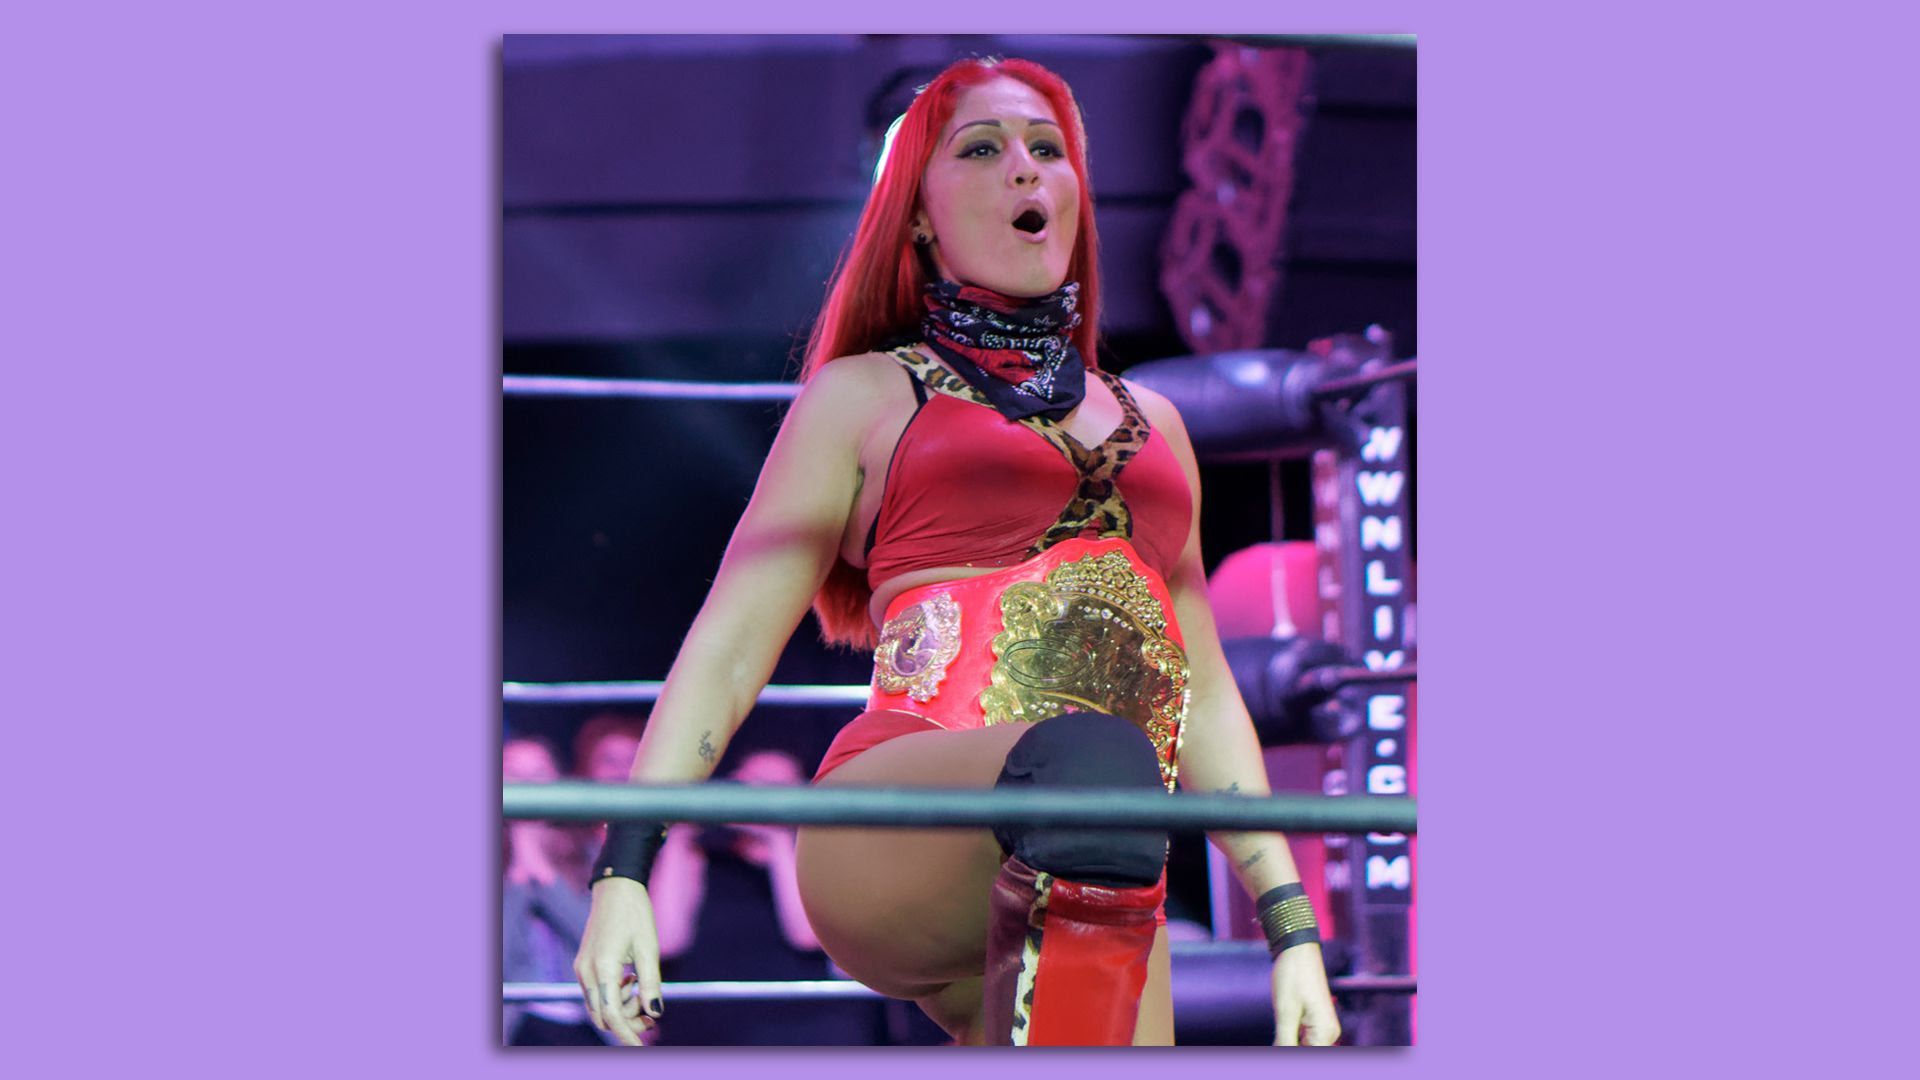 Ivelisse Velez performs a move in the wrestling arena.